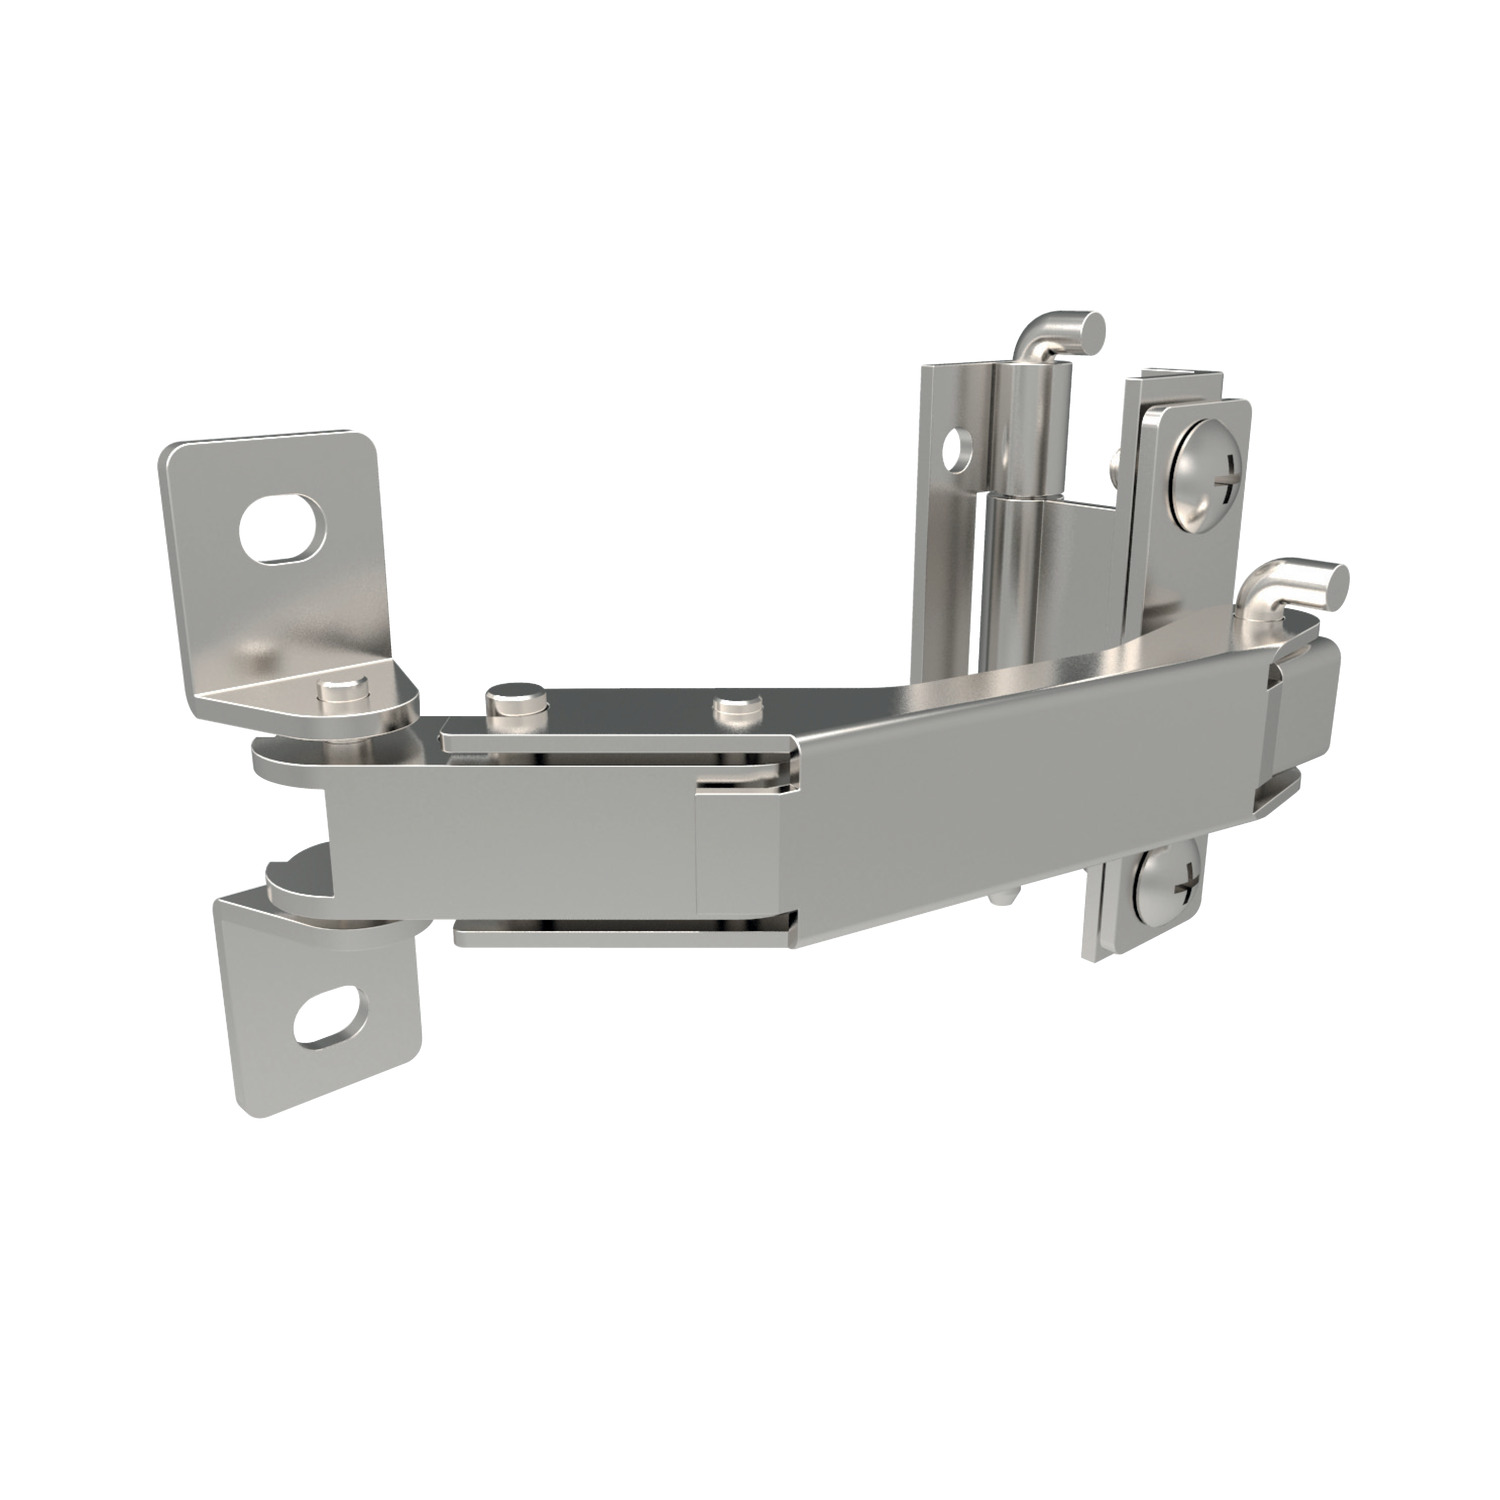 Concealed Pivot Hinges - Integral Stay Made from stainless steel. Combined hinge and stay, easily installed/removed via installation pin.